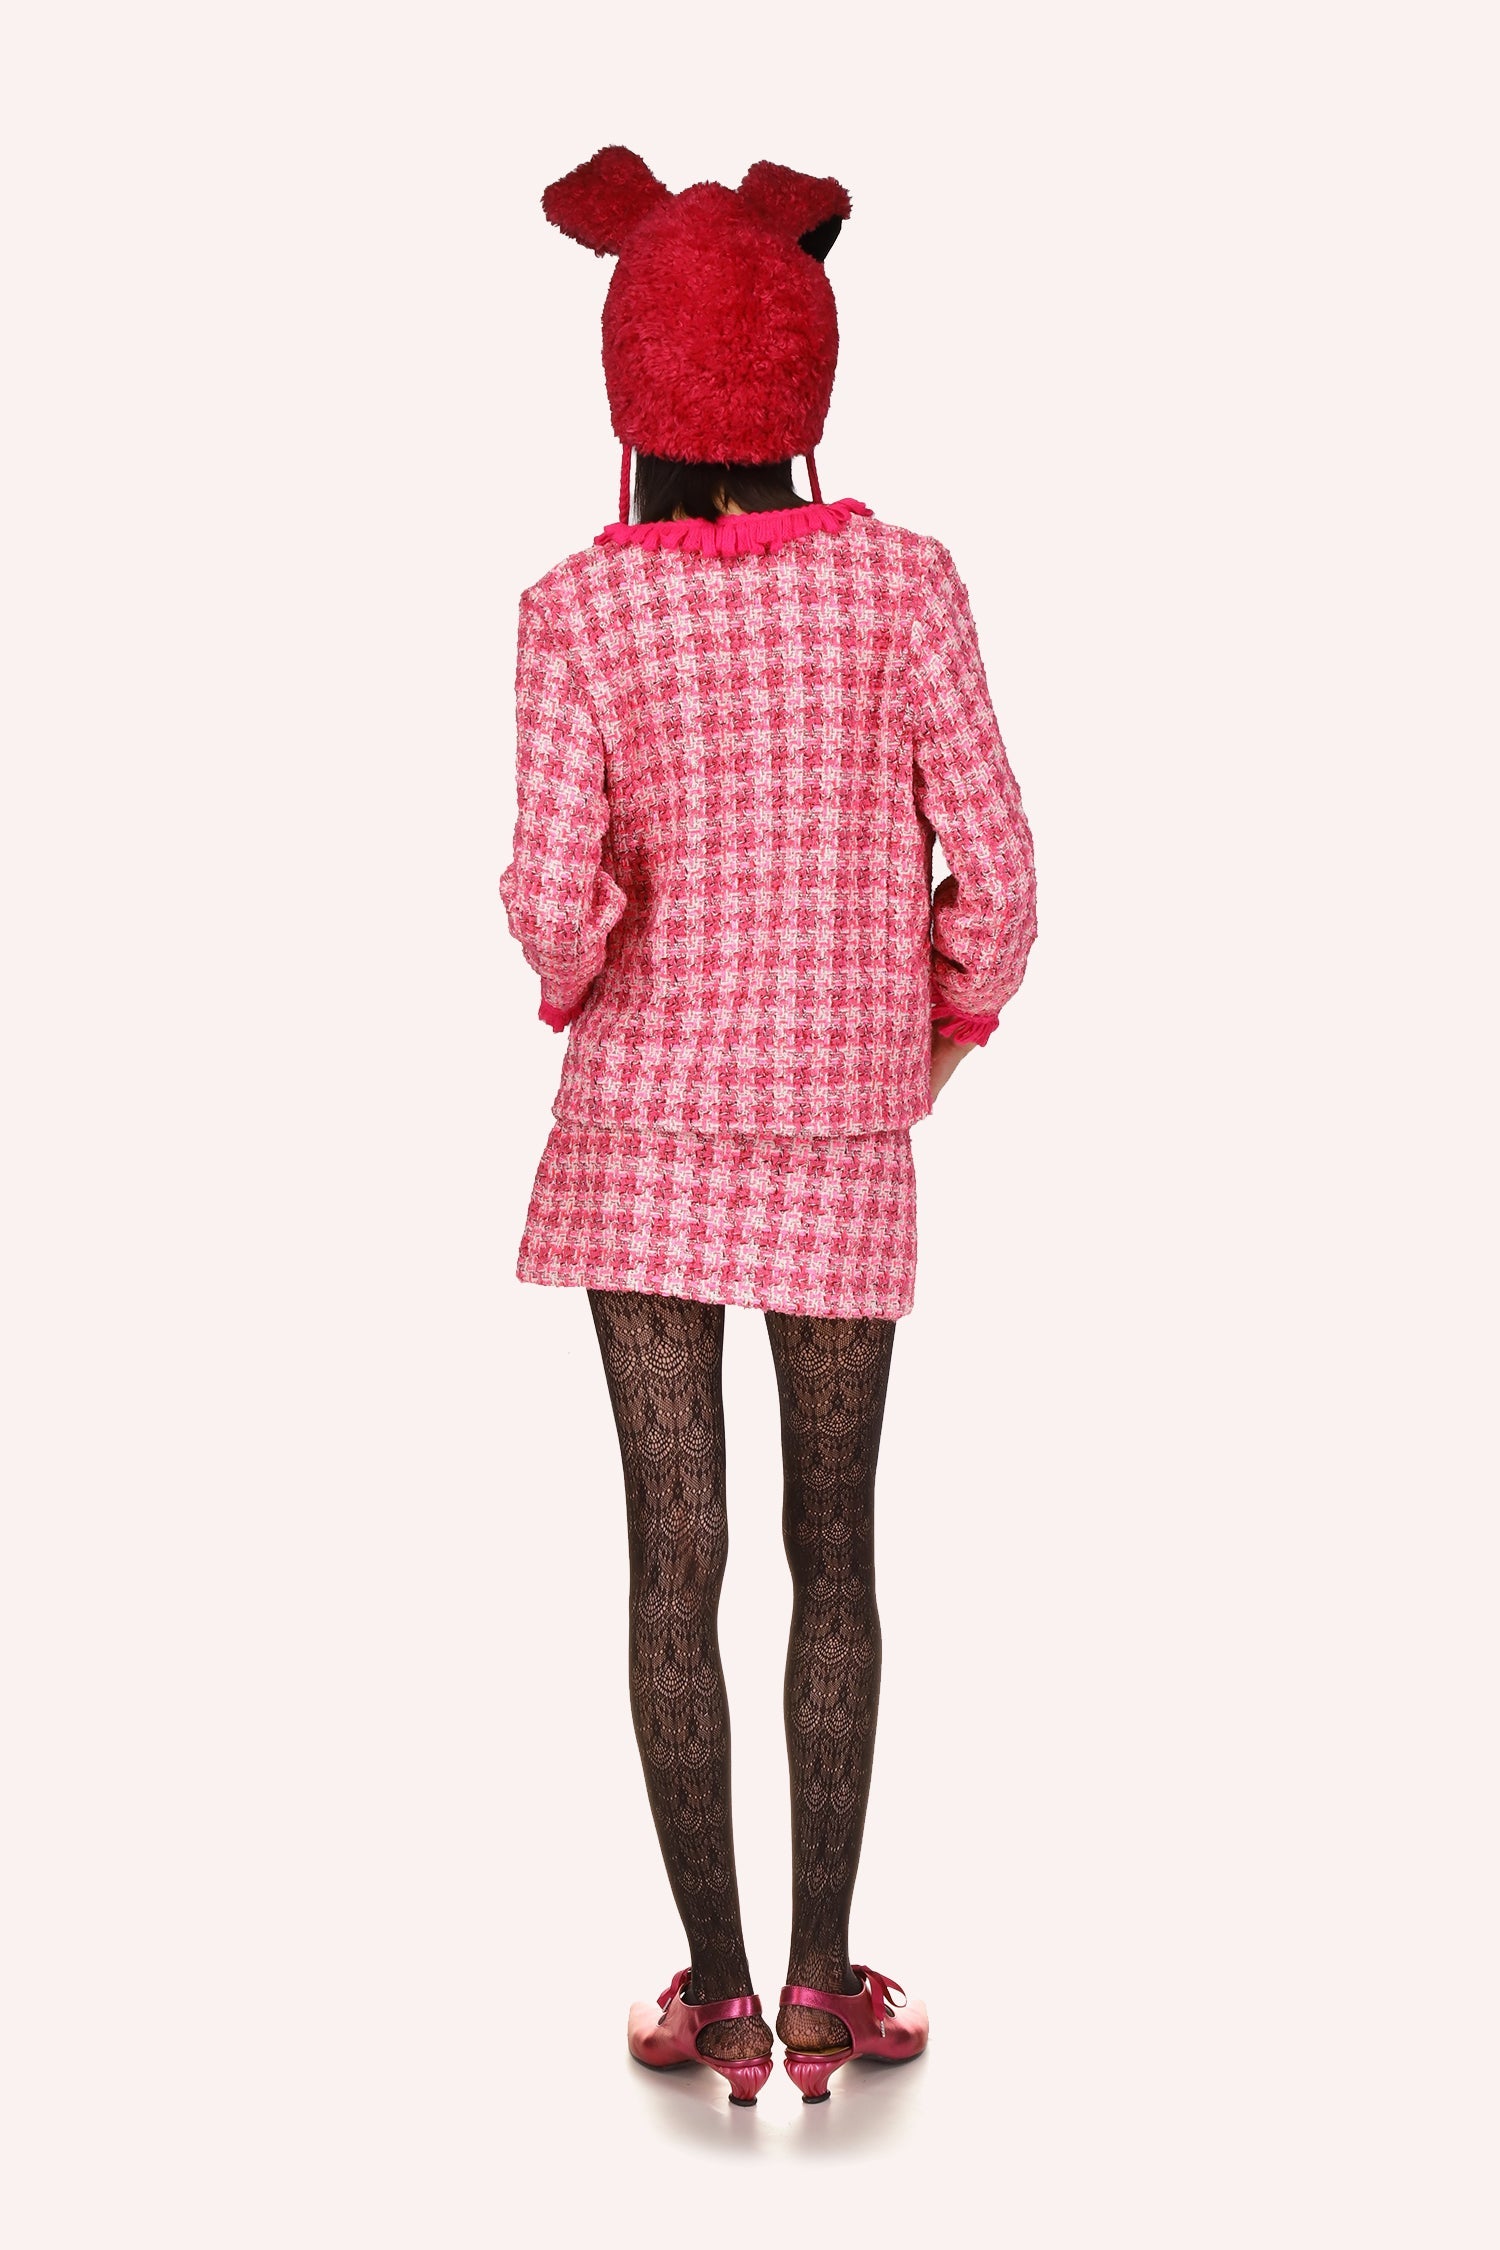 The Anna Sui’s Ribbon Chenille Tweed Jacket Bubblegum is a hip-length jacket in a soft pink shade